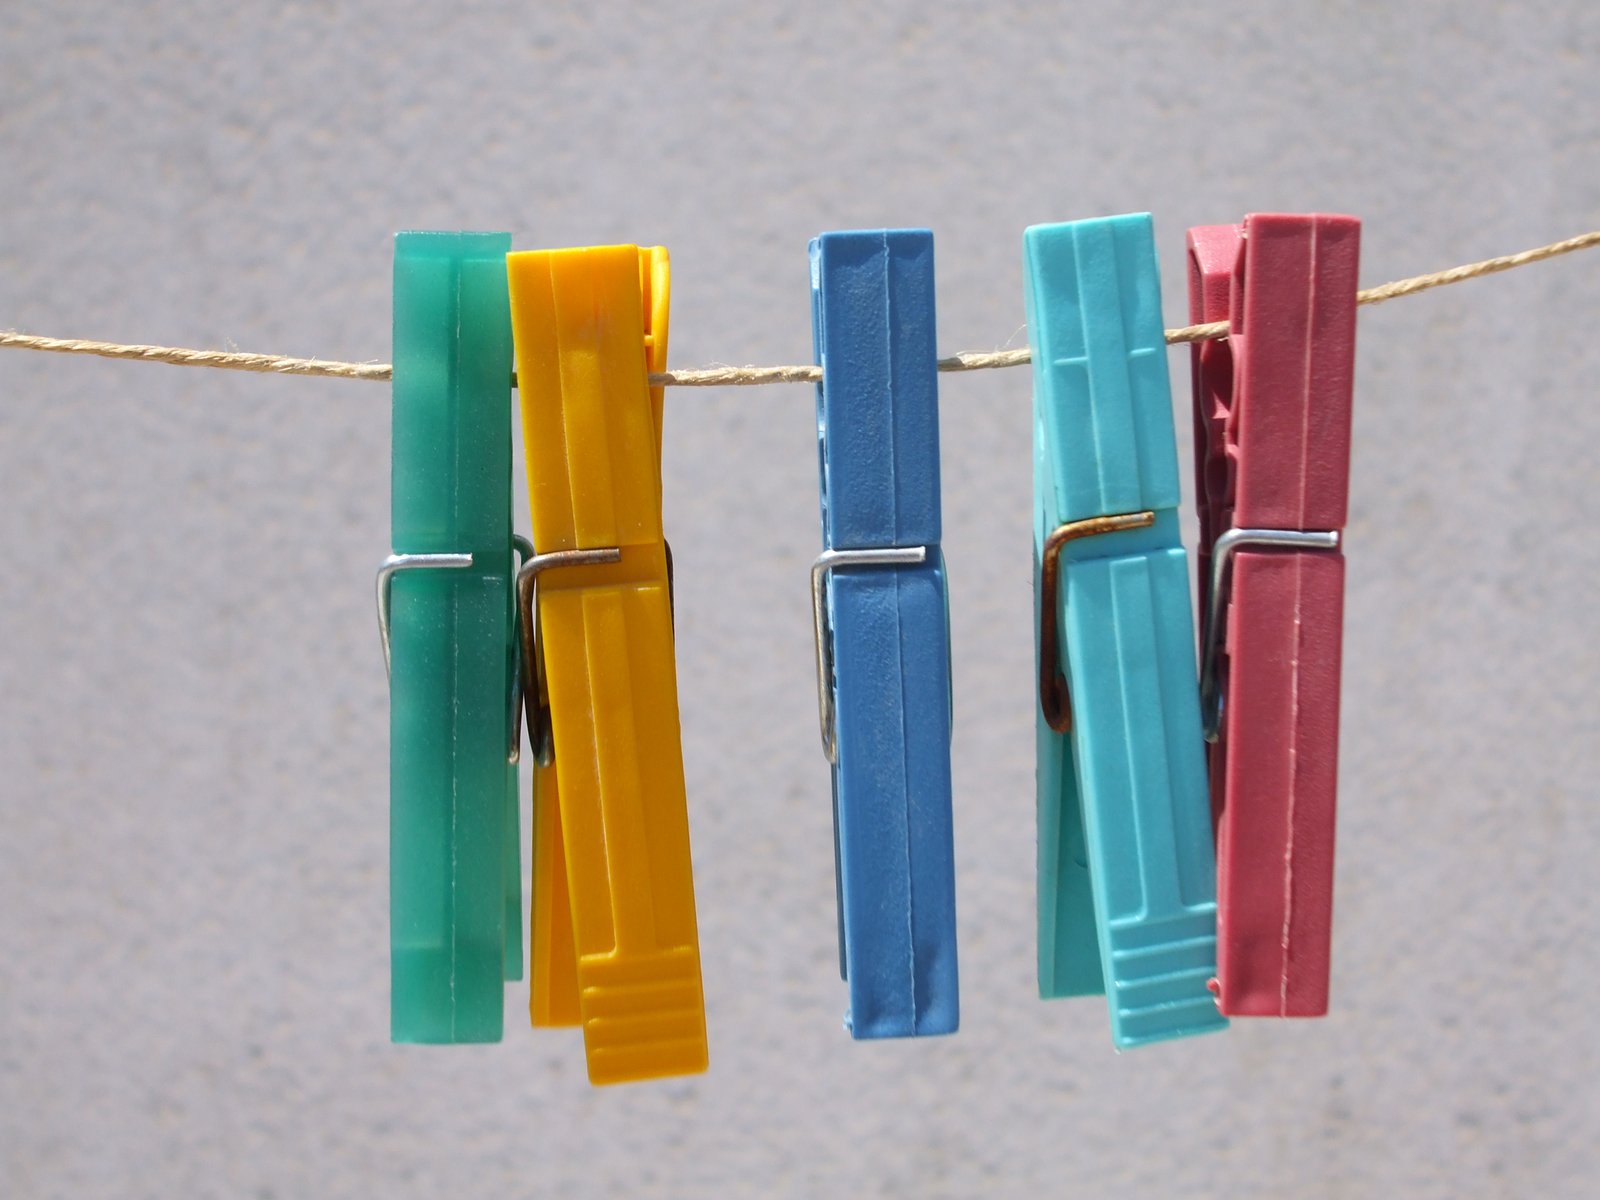 the clothes pins are colored in various colors